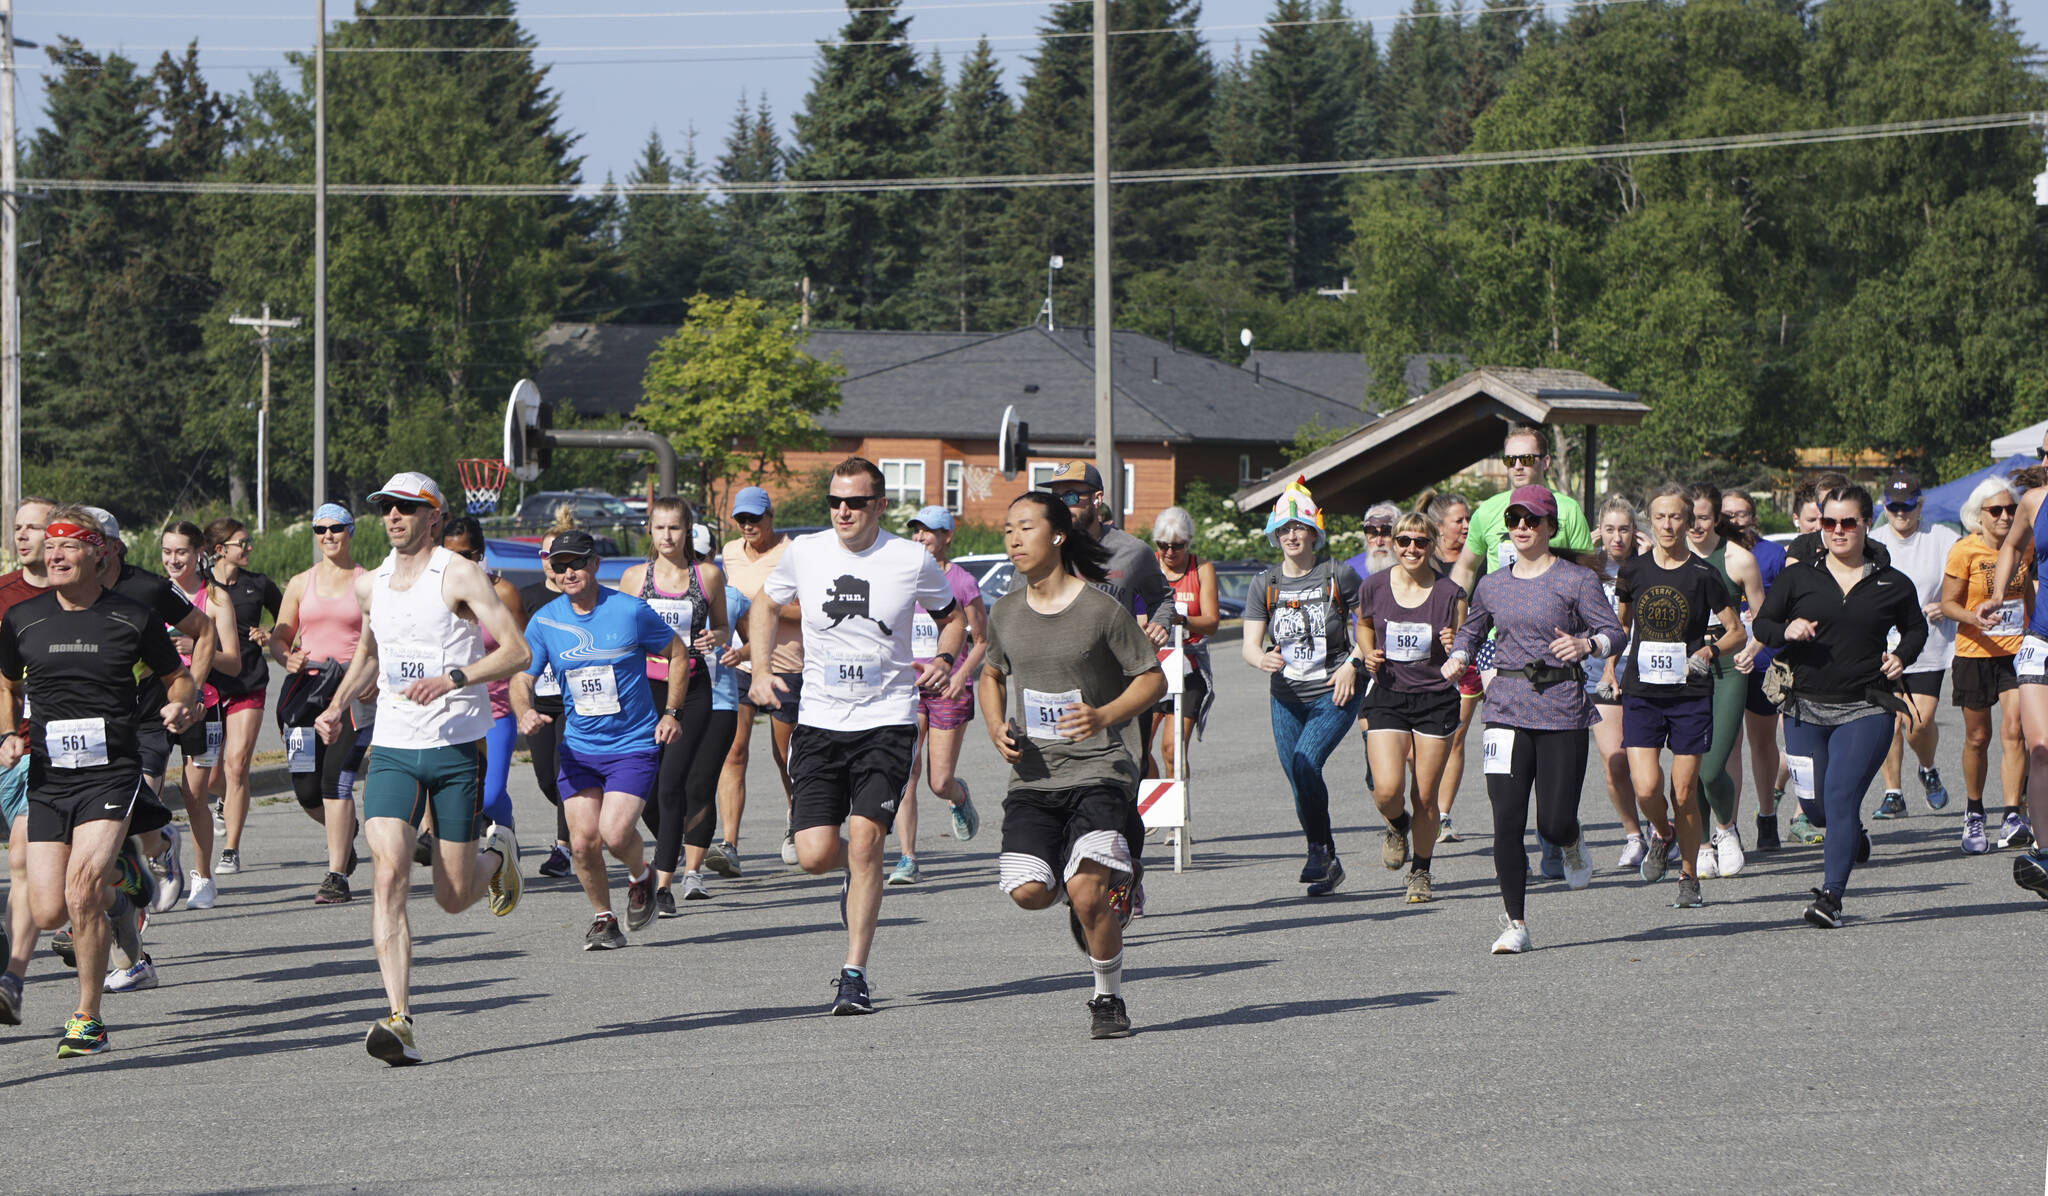 The Homer Spit Run 10k runners take off at the start of the run on Saturday, July 25, 2022, at Homer High School in Homer, Alaska. (Photo by Michael Armstrong/Homer News)